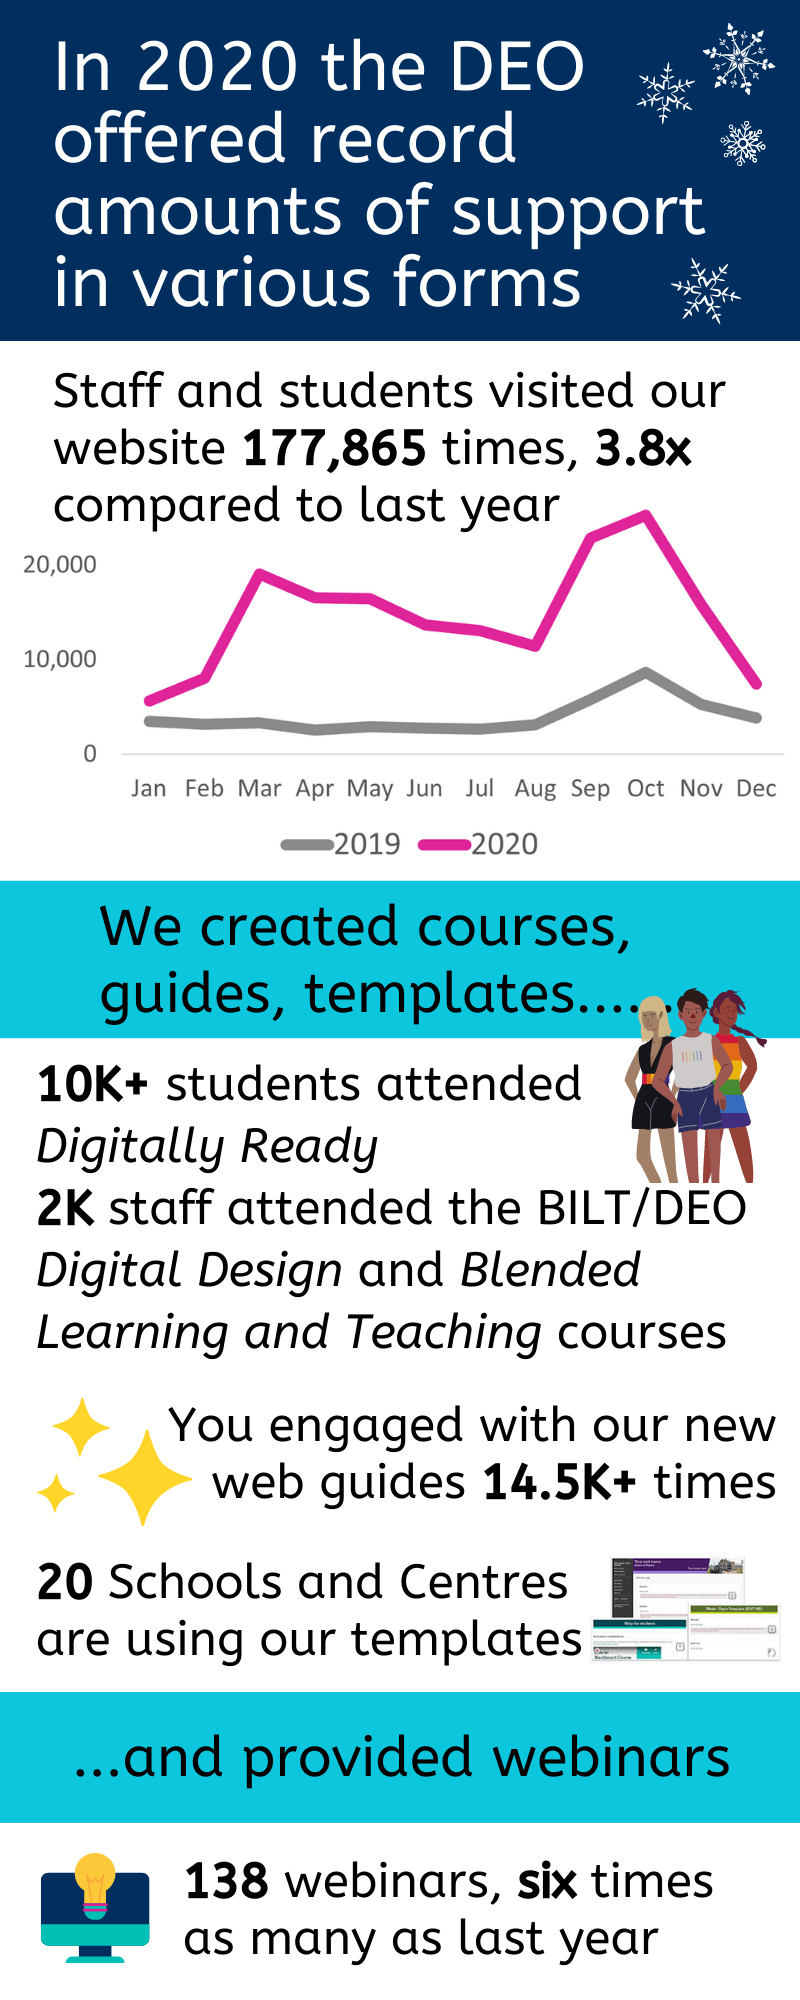 In 2020 we offered record amounts of support. You visited our website 177865 times, 3.8x compared to last year. 10K+ students attended Digitally Ready. 2K staff attended the Digital Design and Blended Learning & Teaching courses.You engaged with our new web guides 14K+ times.20 Schools/Centres use our templates.We provided 138 webinars, 6 times as many as last year. Click for full transcript.